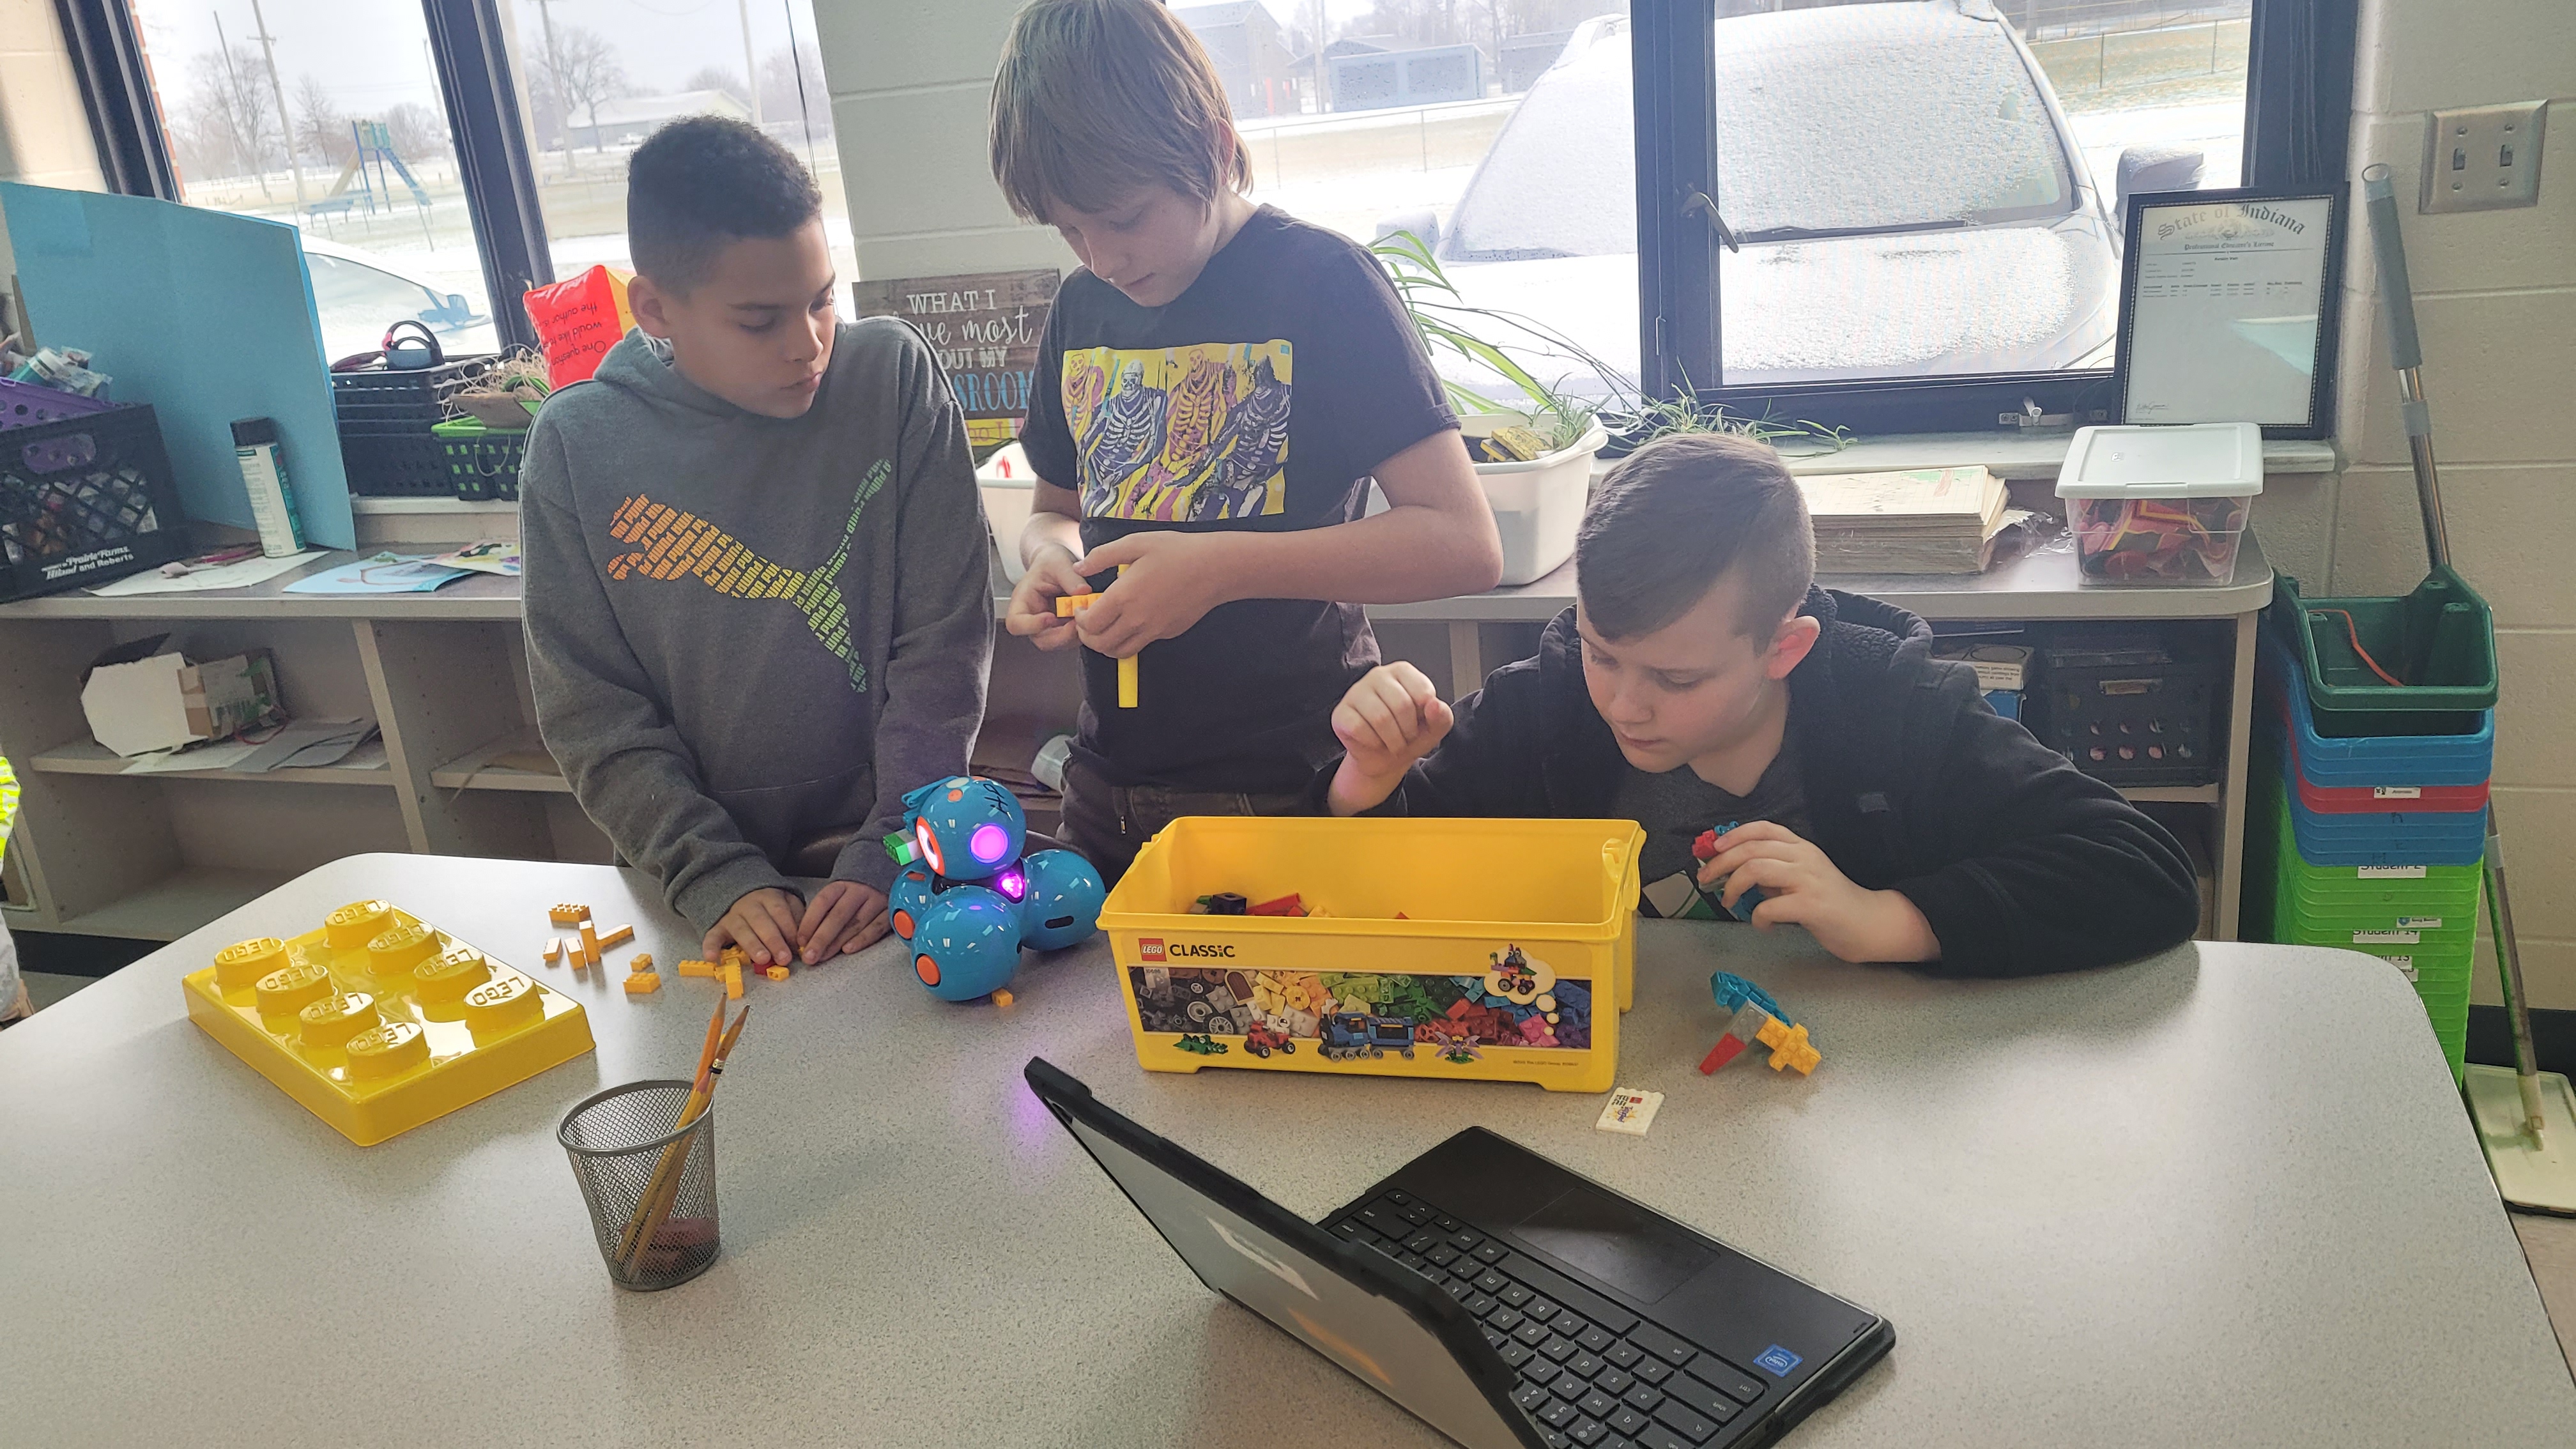 Students at a table with a coding robot, a bin of legos, and a Chromebook